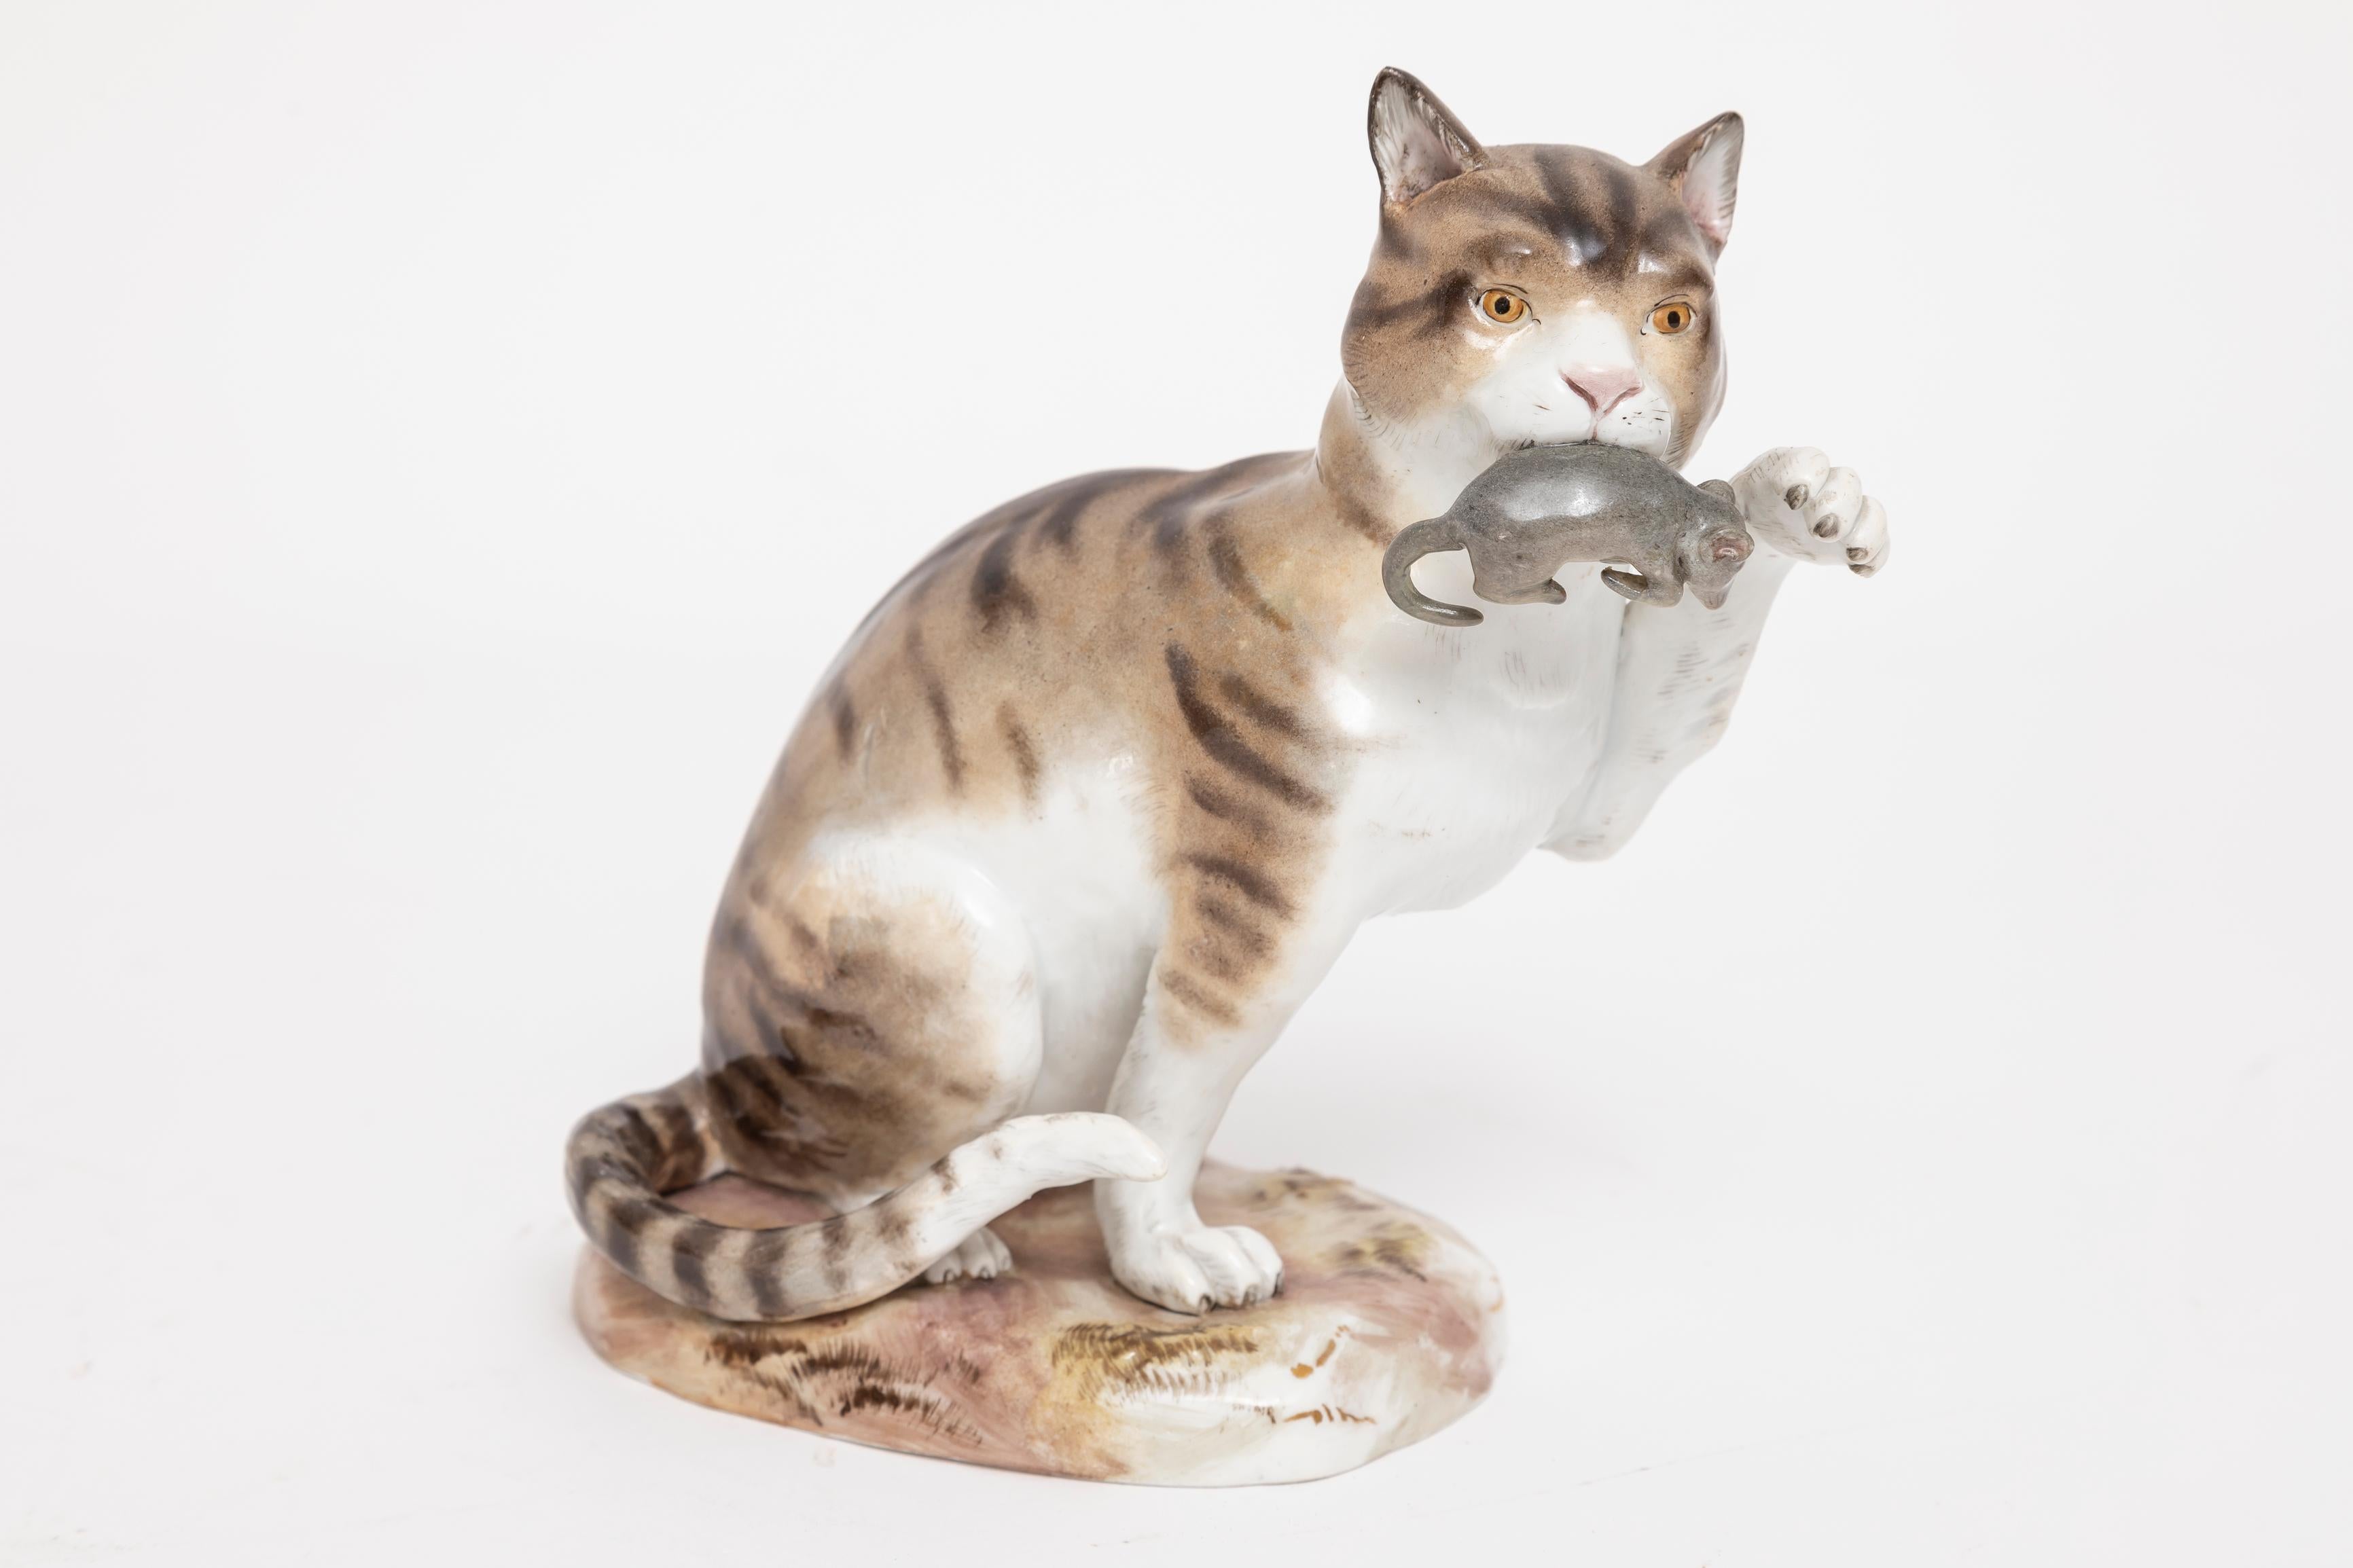 A Marvelous 19th Century Meissen Porcelain Figurine Depicting a Cat with Captured Mouse. 
 Standing at an impressive 7 inches tall, this adorable handcrafted, hand-painted Meissen Porcelain striped cat stands as a testament to Meissen's exquisite